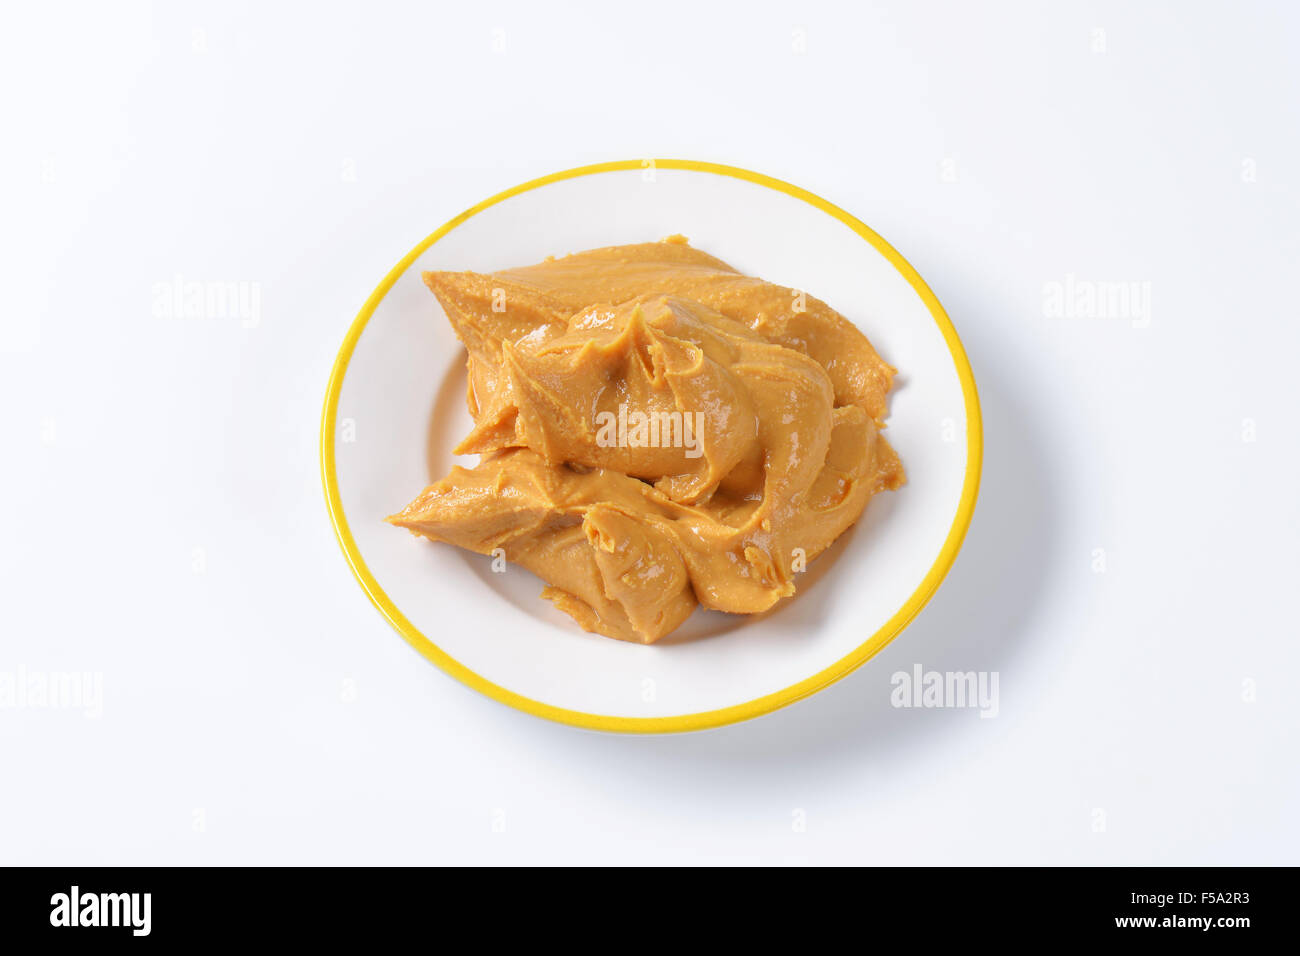 Creamy peanut butter on a plate Stock Photo